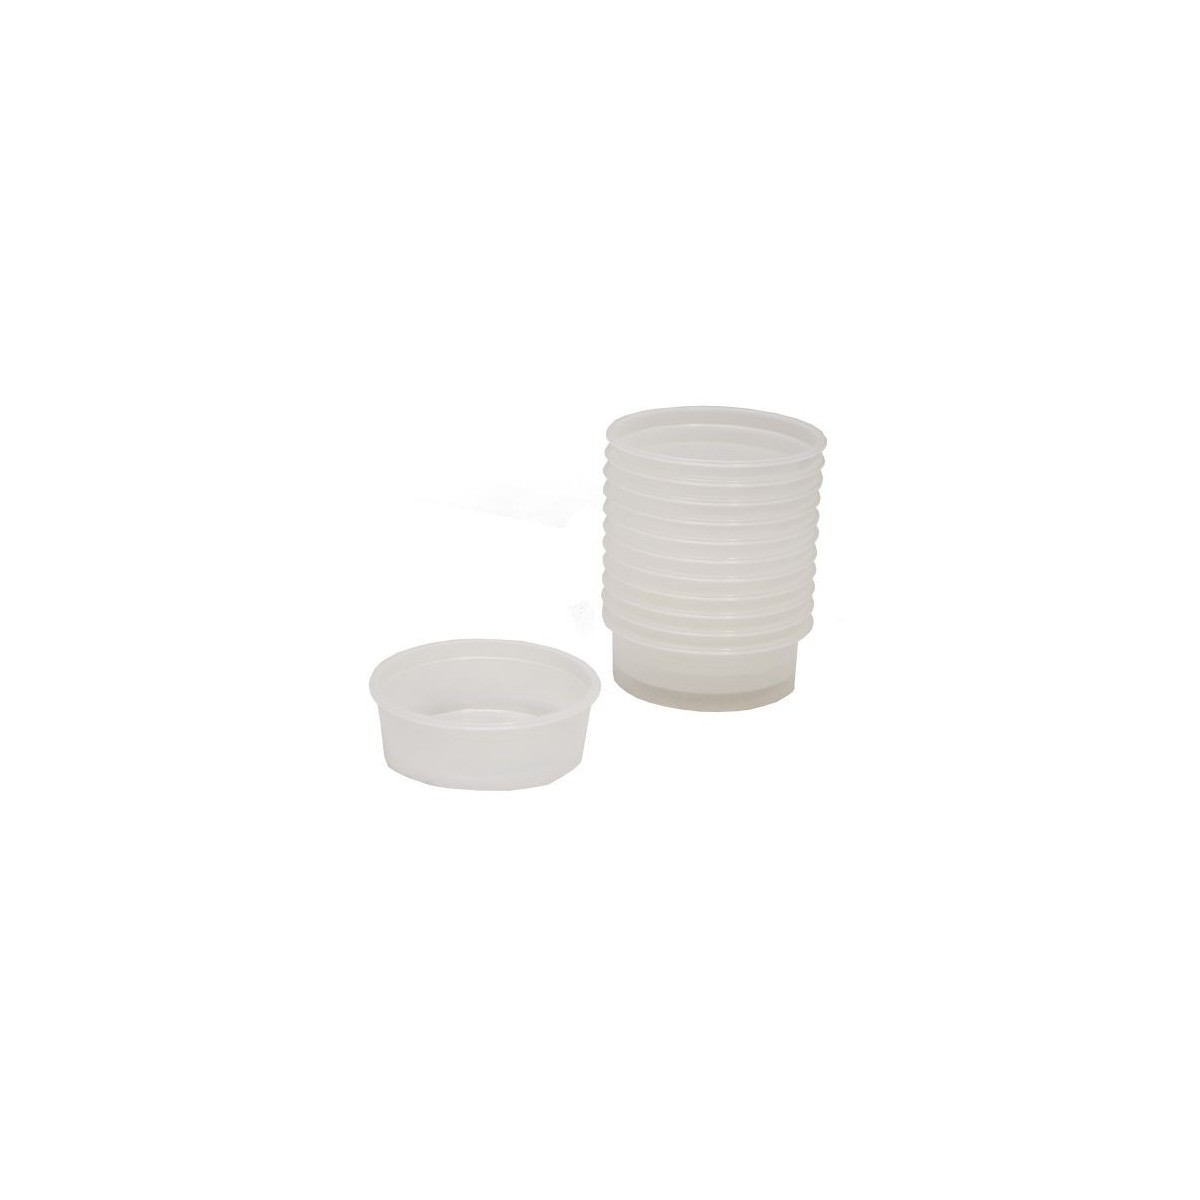 PLASTIC POT FOR BABY CUP 3/32 Ø94X32MM 100 PIECES FOST+2019 INCLUDED  PIECE